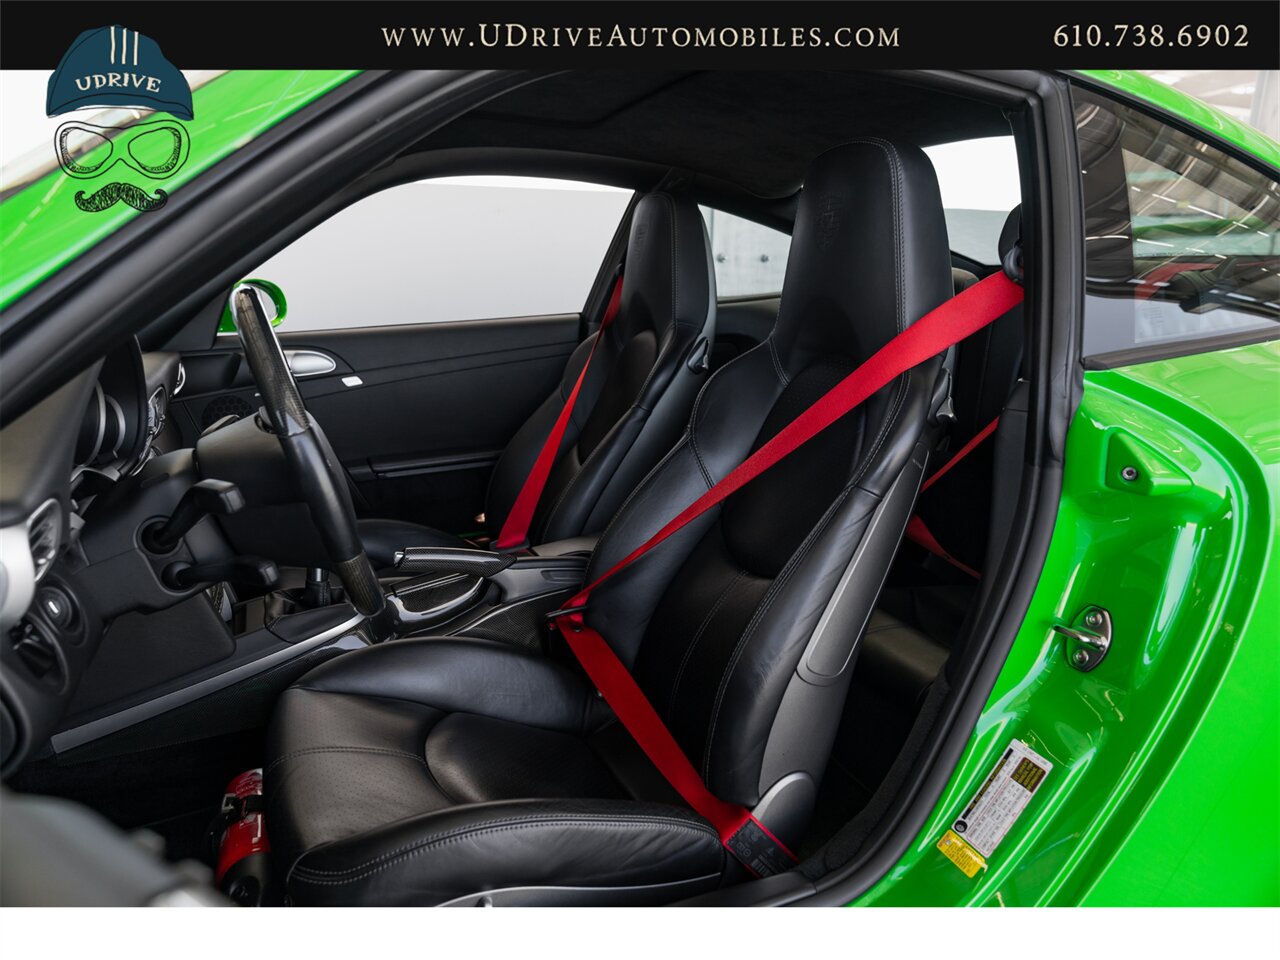 2006 Porsche 911 Carrera 4S  997 PTS Signal Green 6Sp Sport Sts Spt Chrono Spt Exhst - Photo 31 - West Chester, PA 19382